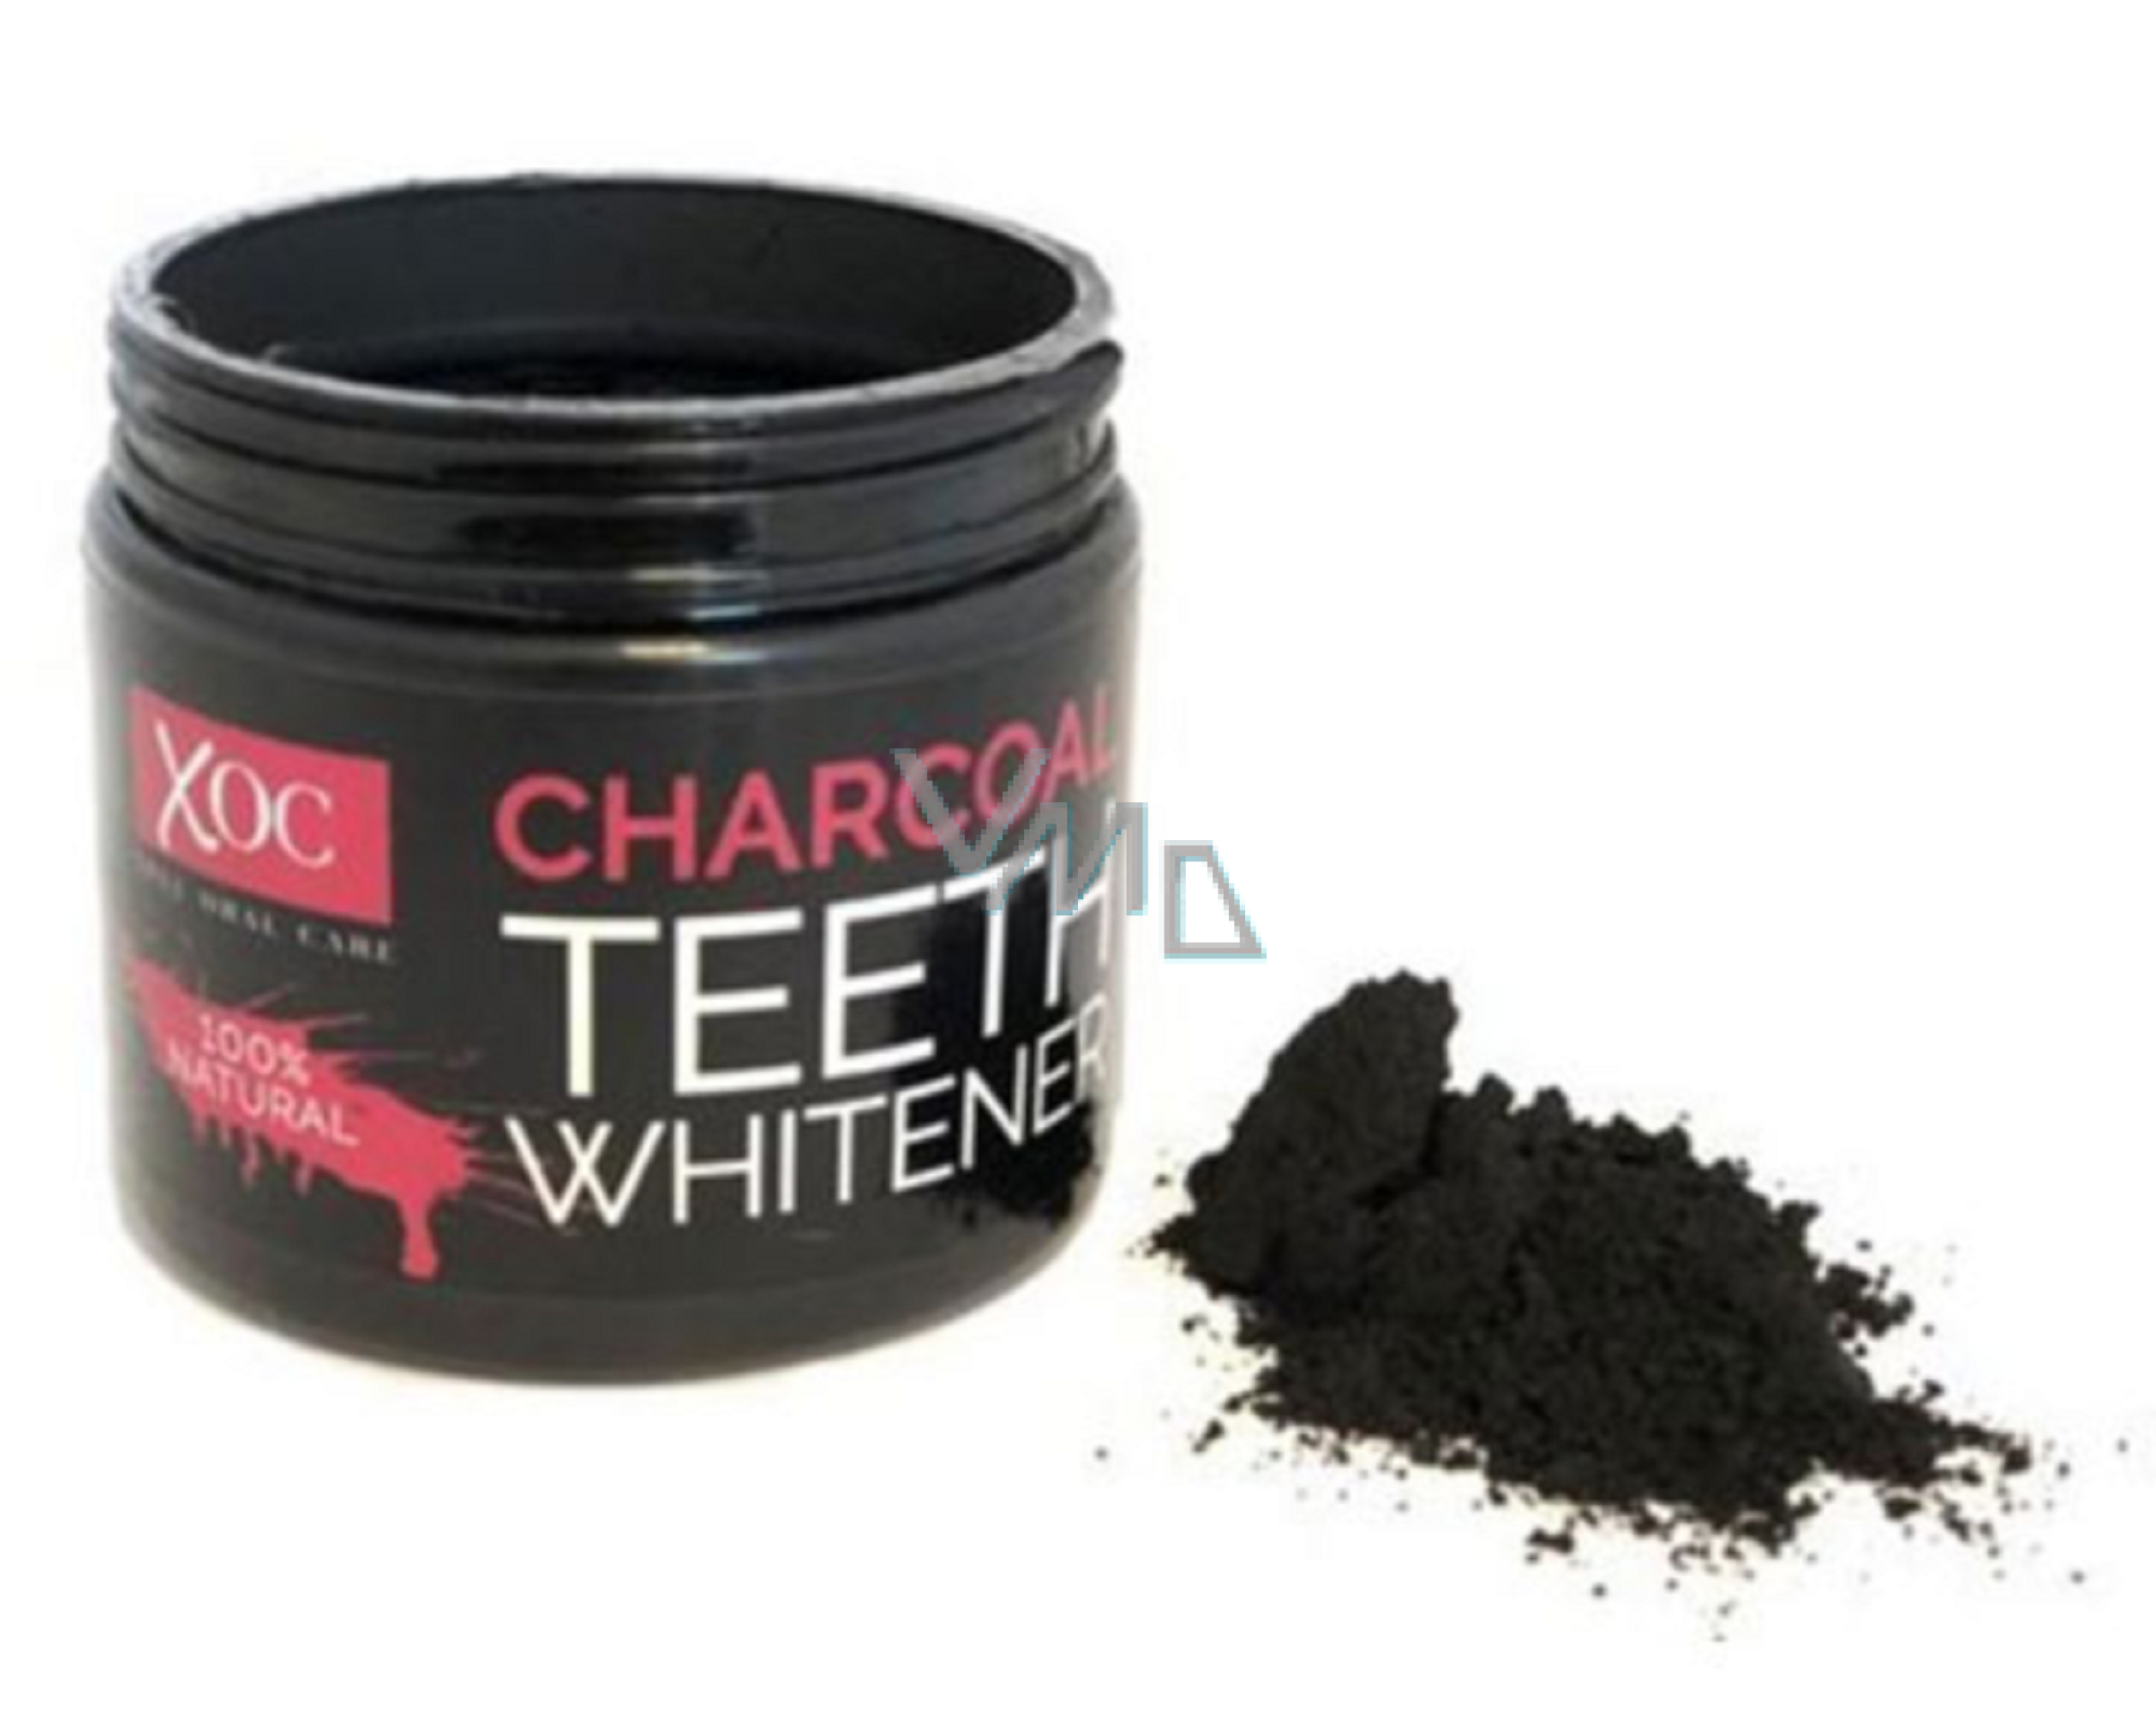 Xoc Charcoal Activated carbon whitening powder for teeth 60 g - VMD  parfumerie - drogerie